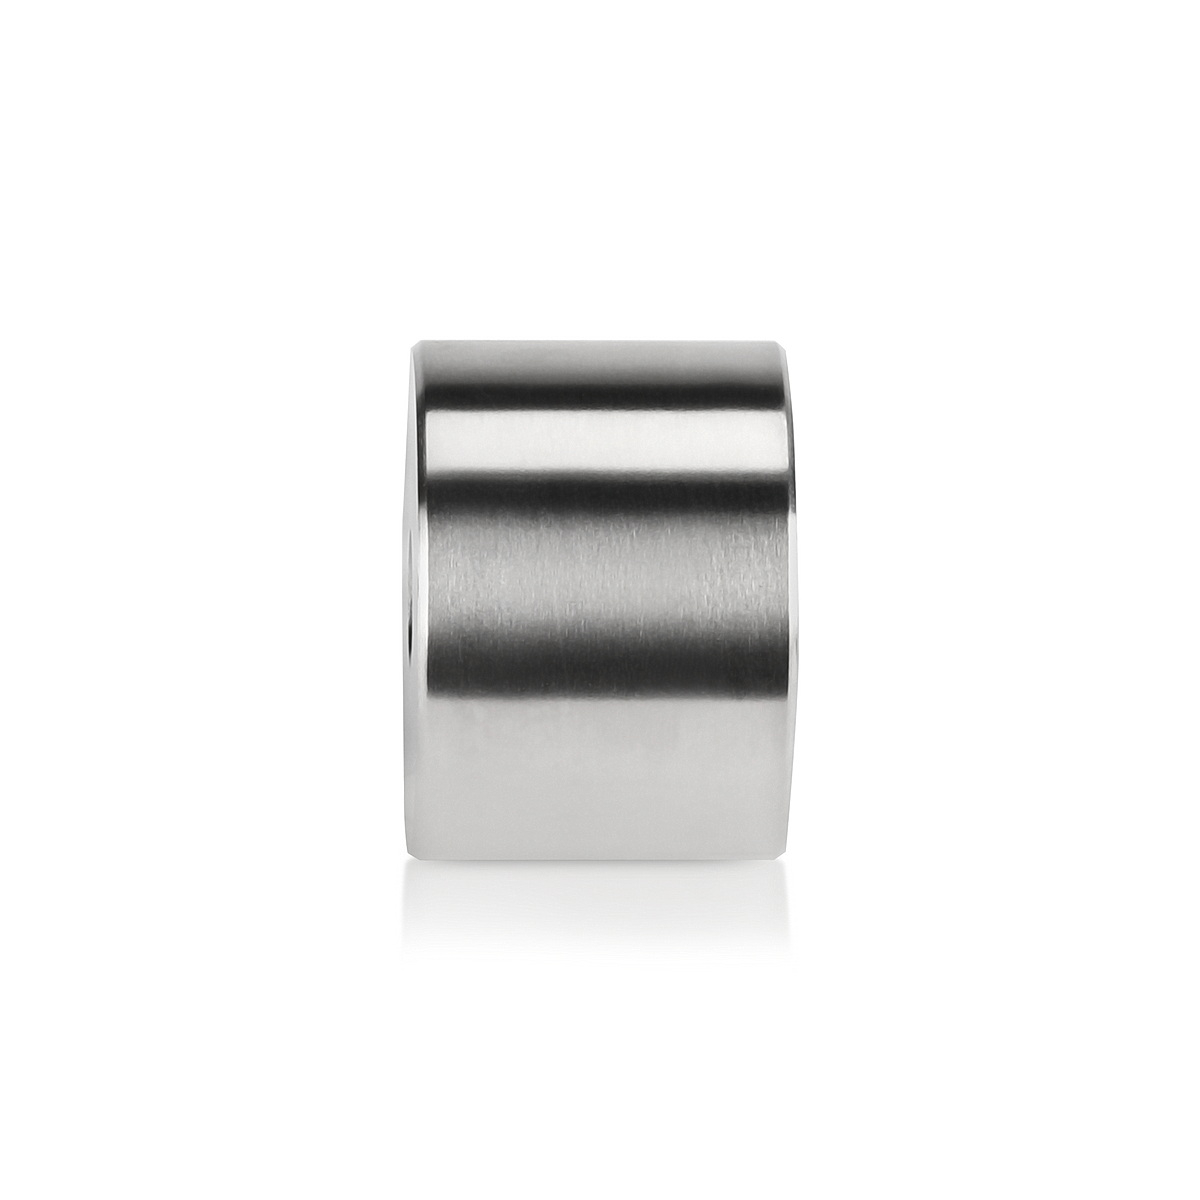 3/8-16 Threaded Barrels Diameter: 1 1/2'', Length: 1 1/16'',  Stainless Steel 304, Brushed Satin Finish [Required Material Hole Size: 3/8'' ]